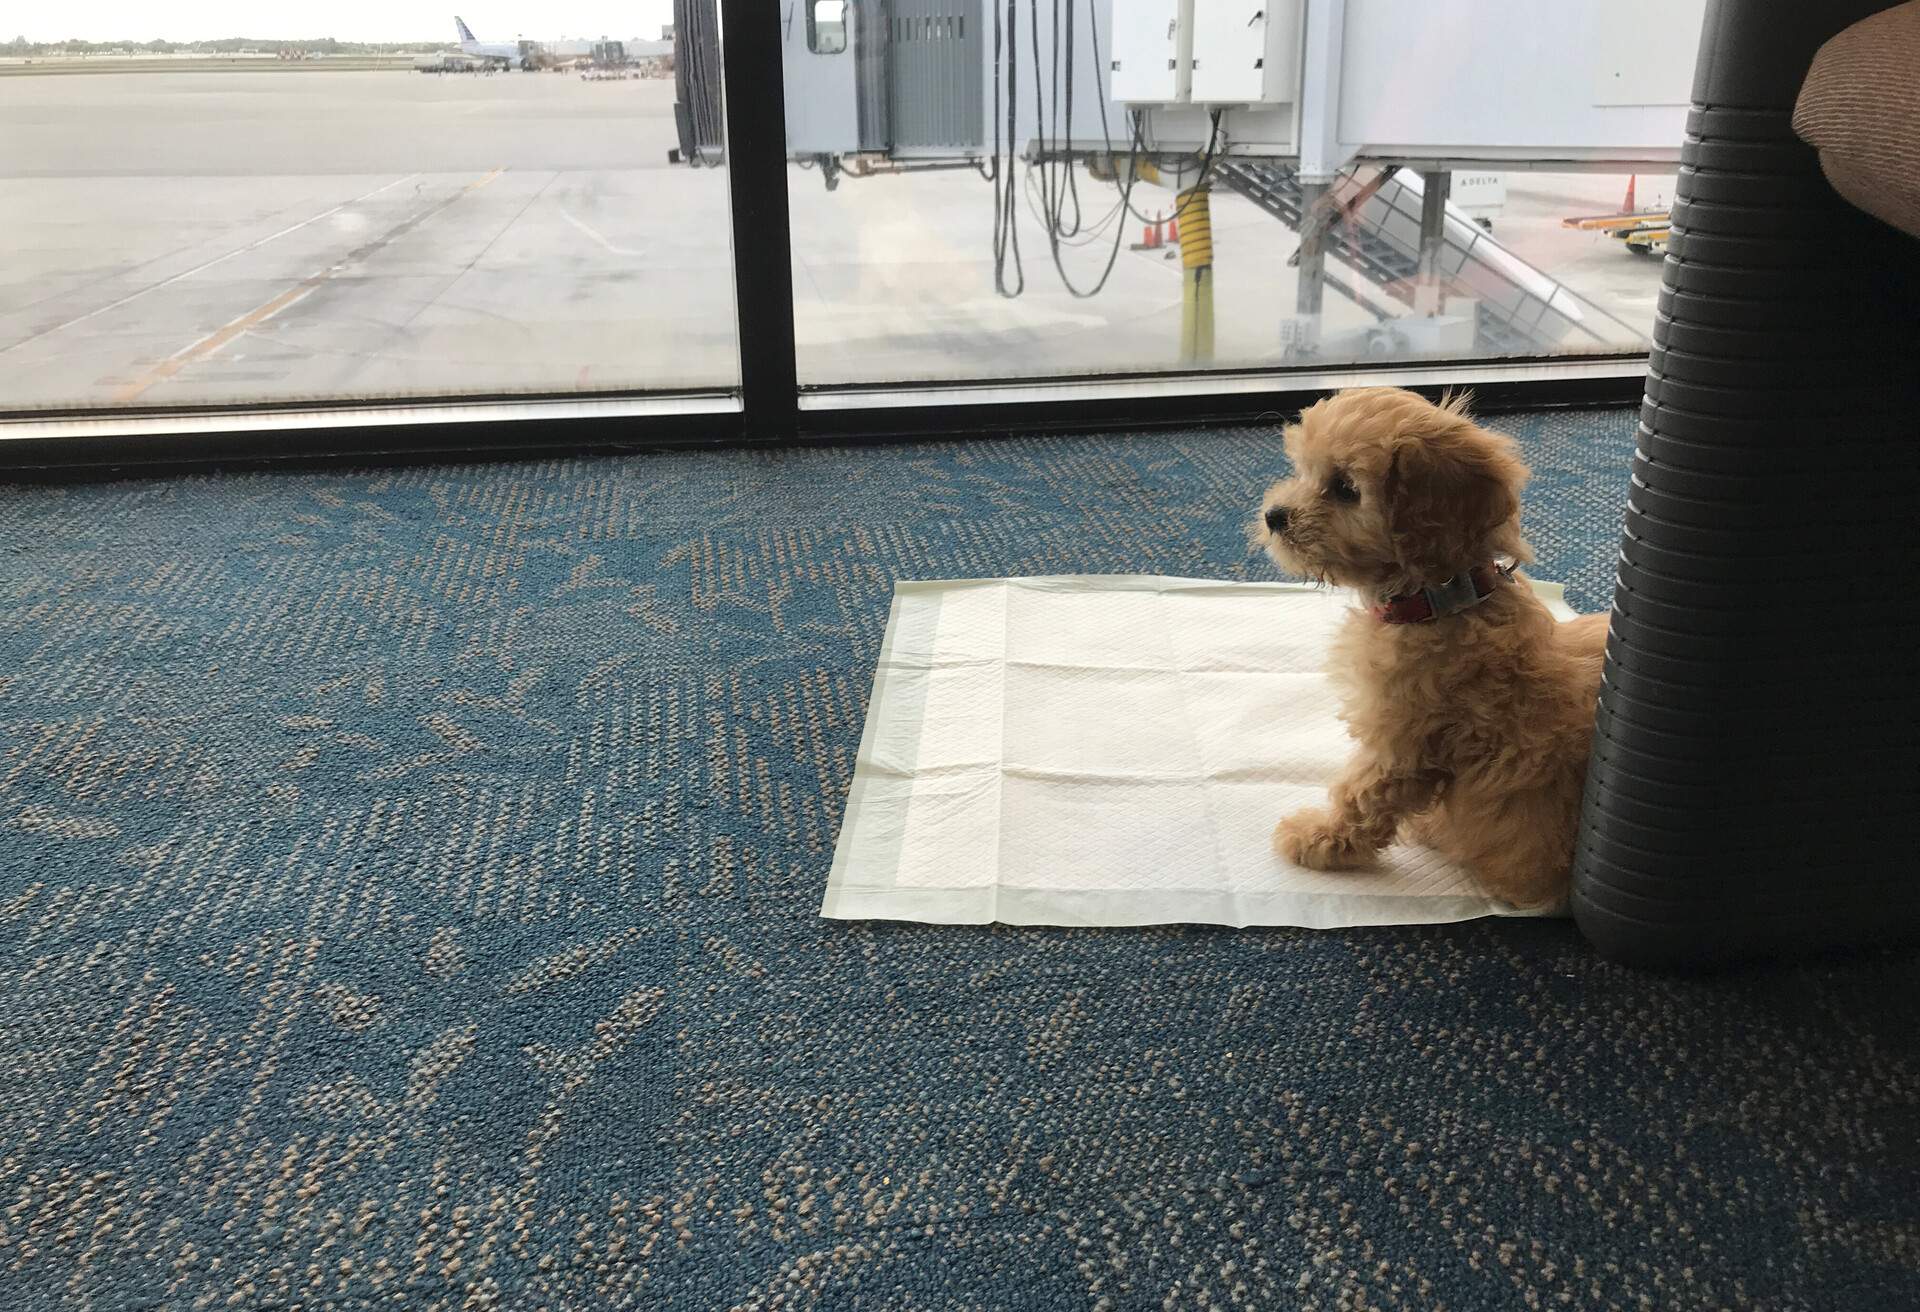 A puppy is waiting for his plane to arrive at the airport